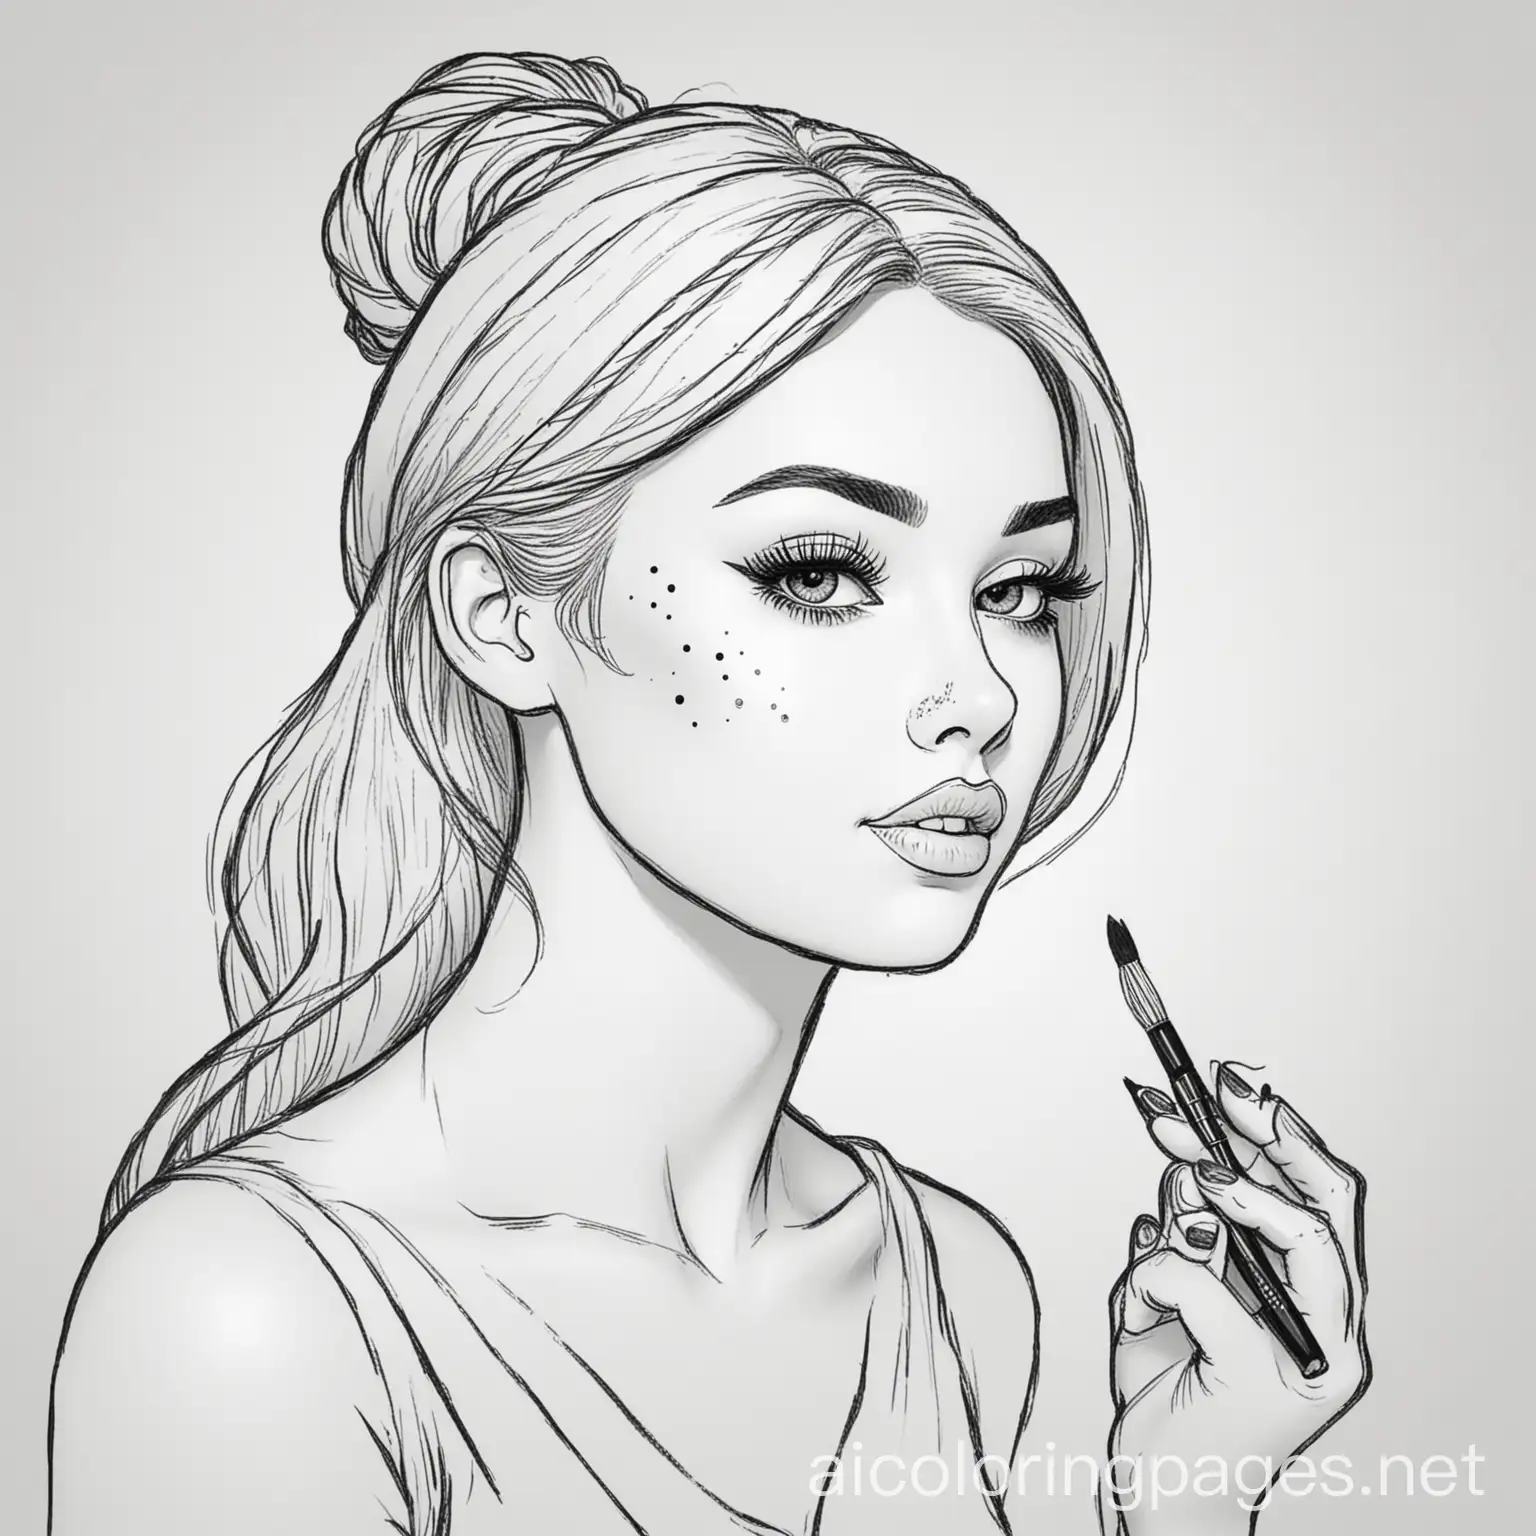 Woman-Doing-Makeup-Coloring-Page-Black-and-White-Line-Art